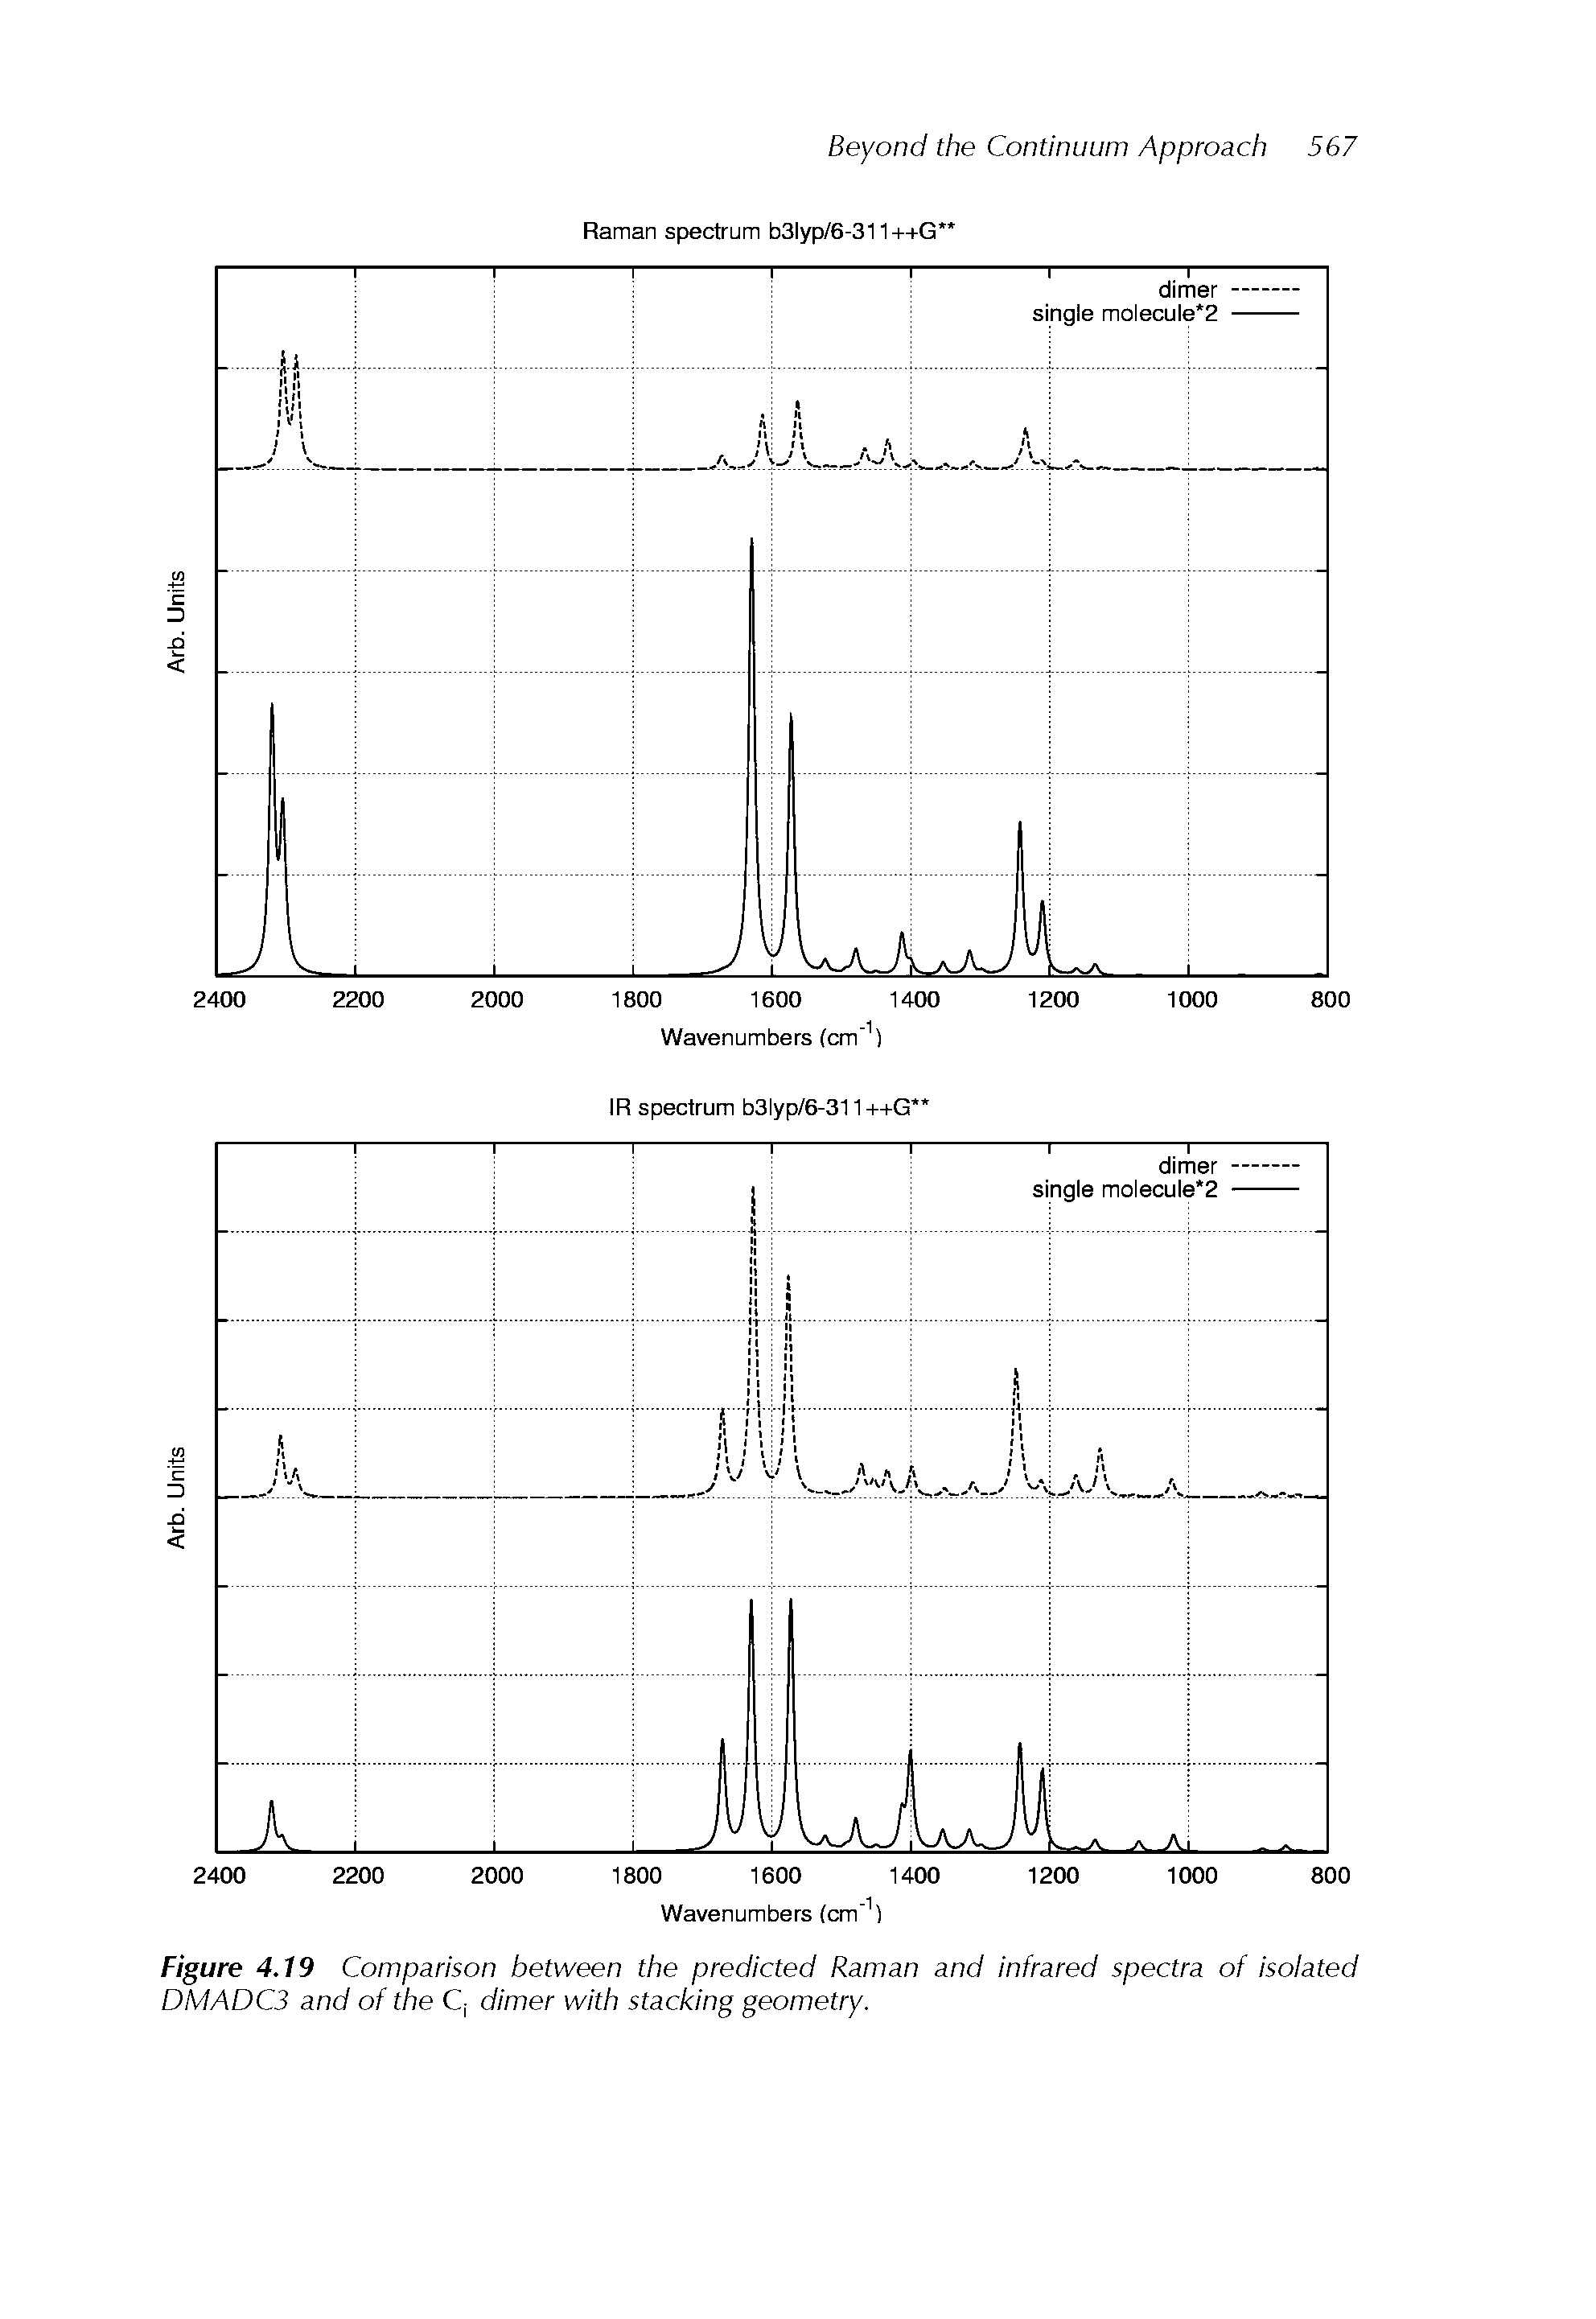 Figure 4.19 Comparison between the predicted Raman and infrared spectra of isolated DMADC3 and of the Cj dimer with stacking geometry.